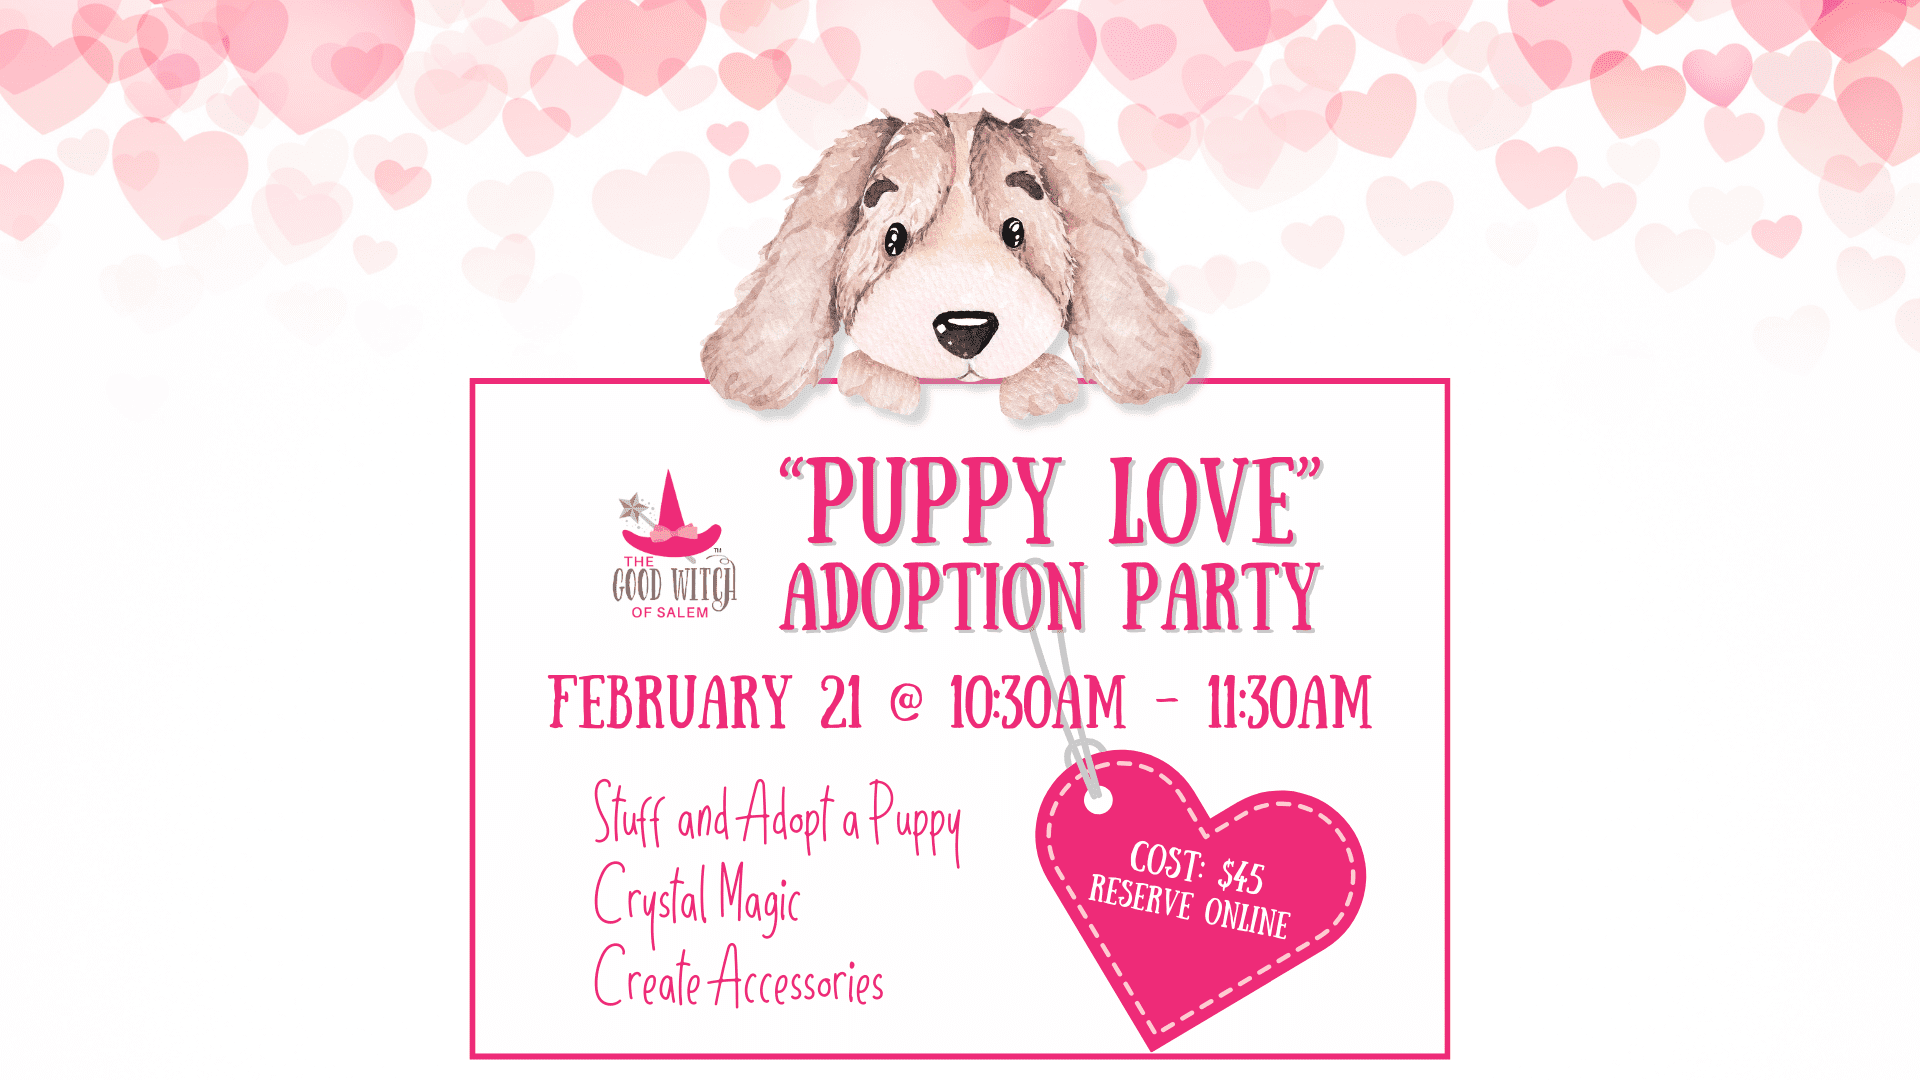 Flyer for a fun-filled puppy adoption event.